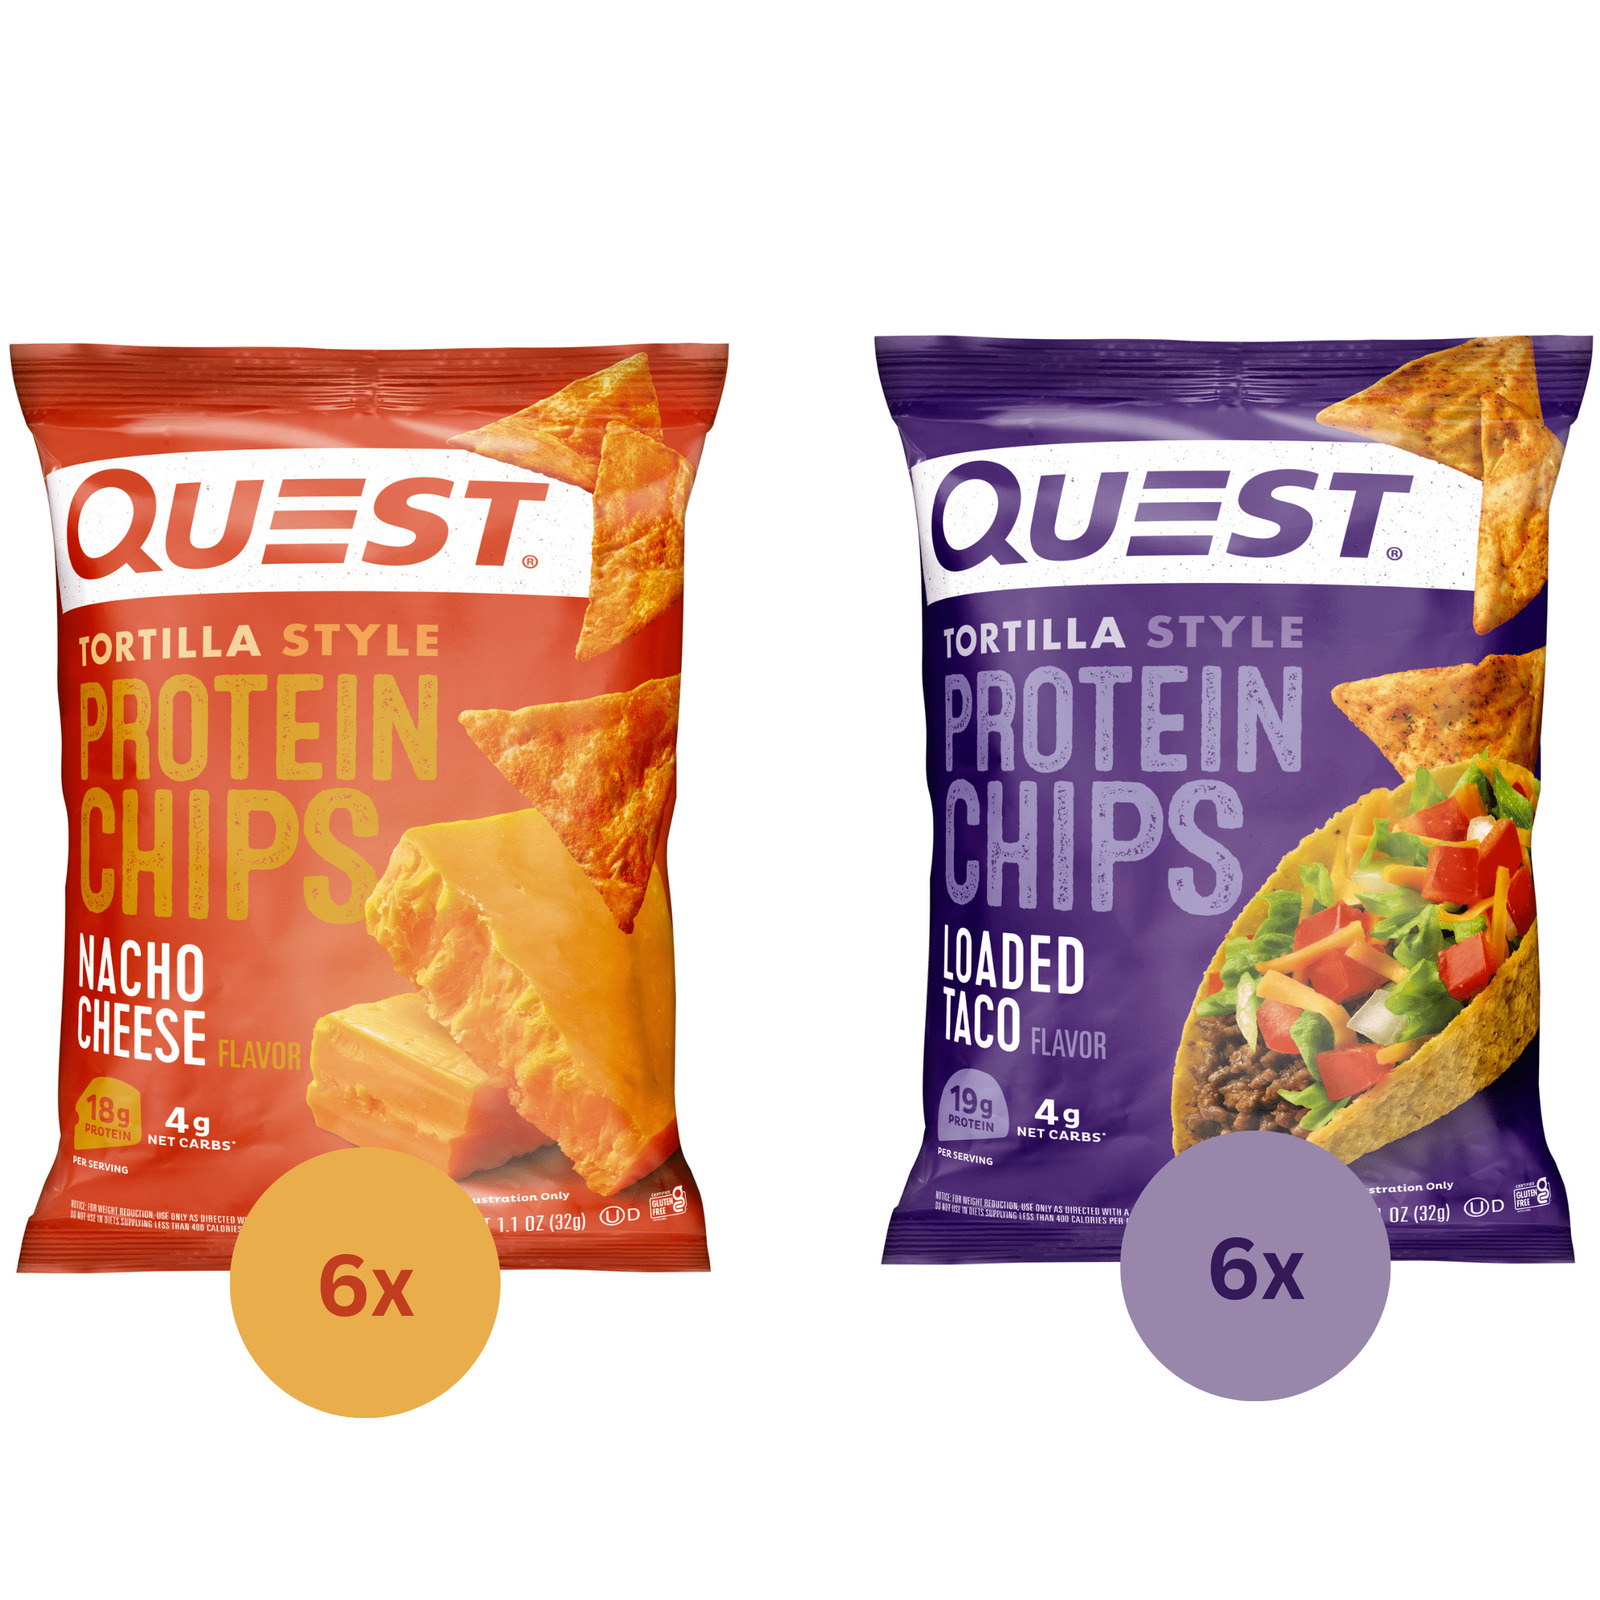 Quest Tortilla Style Protein Chips Nacho Cheese and Loaded Taco Variety 12 Count